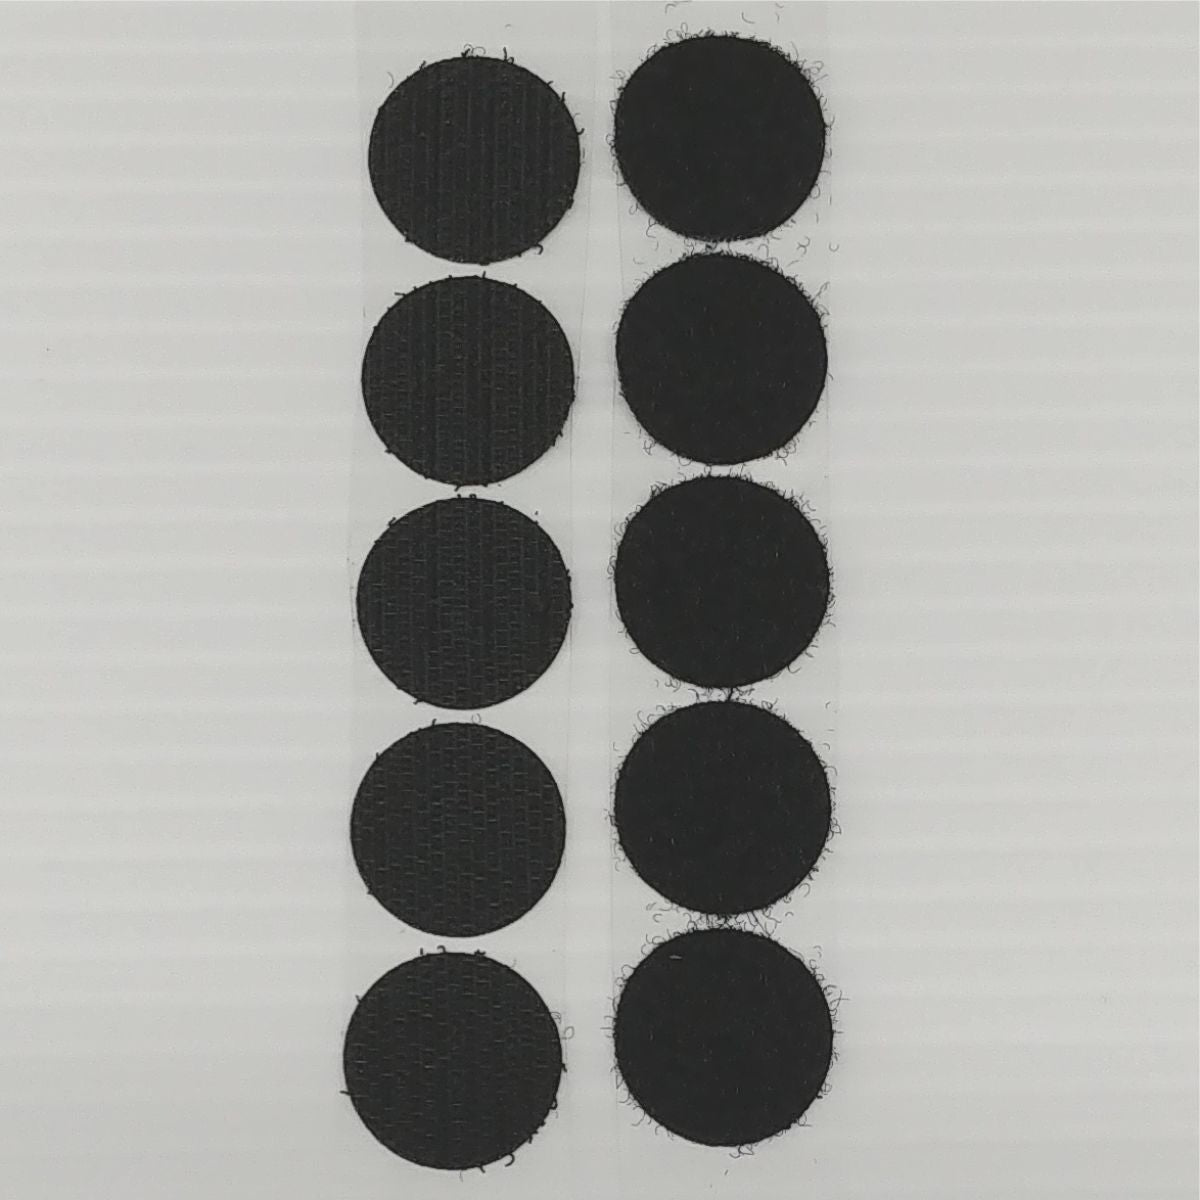 Self Adhesive Dots 5 Pack-Black SALE While Supplies Last –